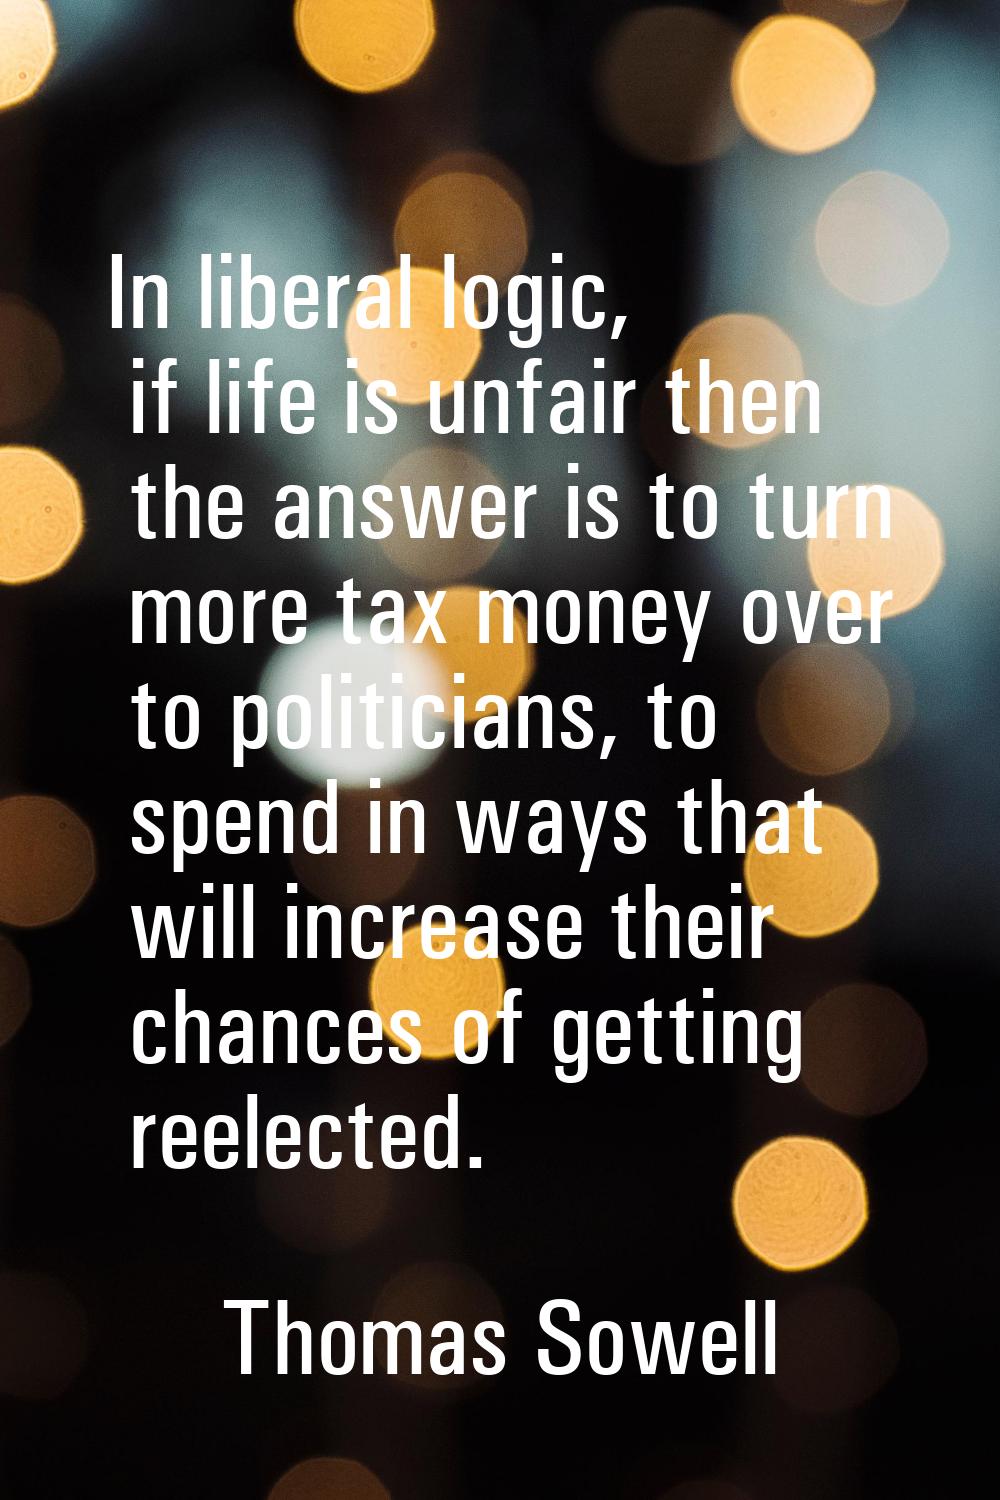 In liberal logic, if life is unfair then the answer is to turn more tax money over to politicians, 